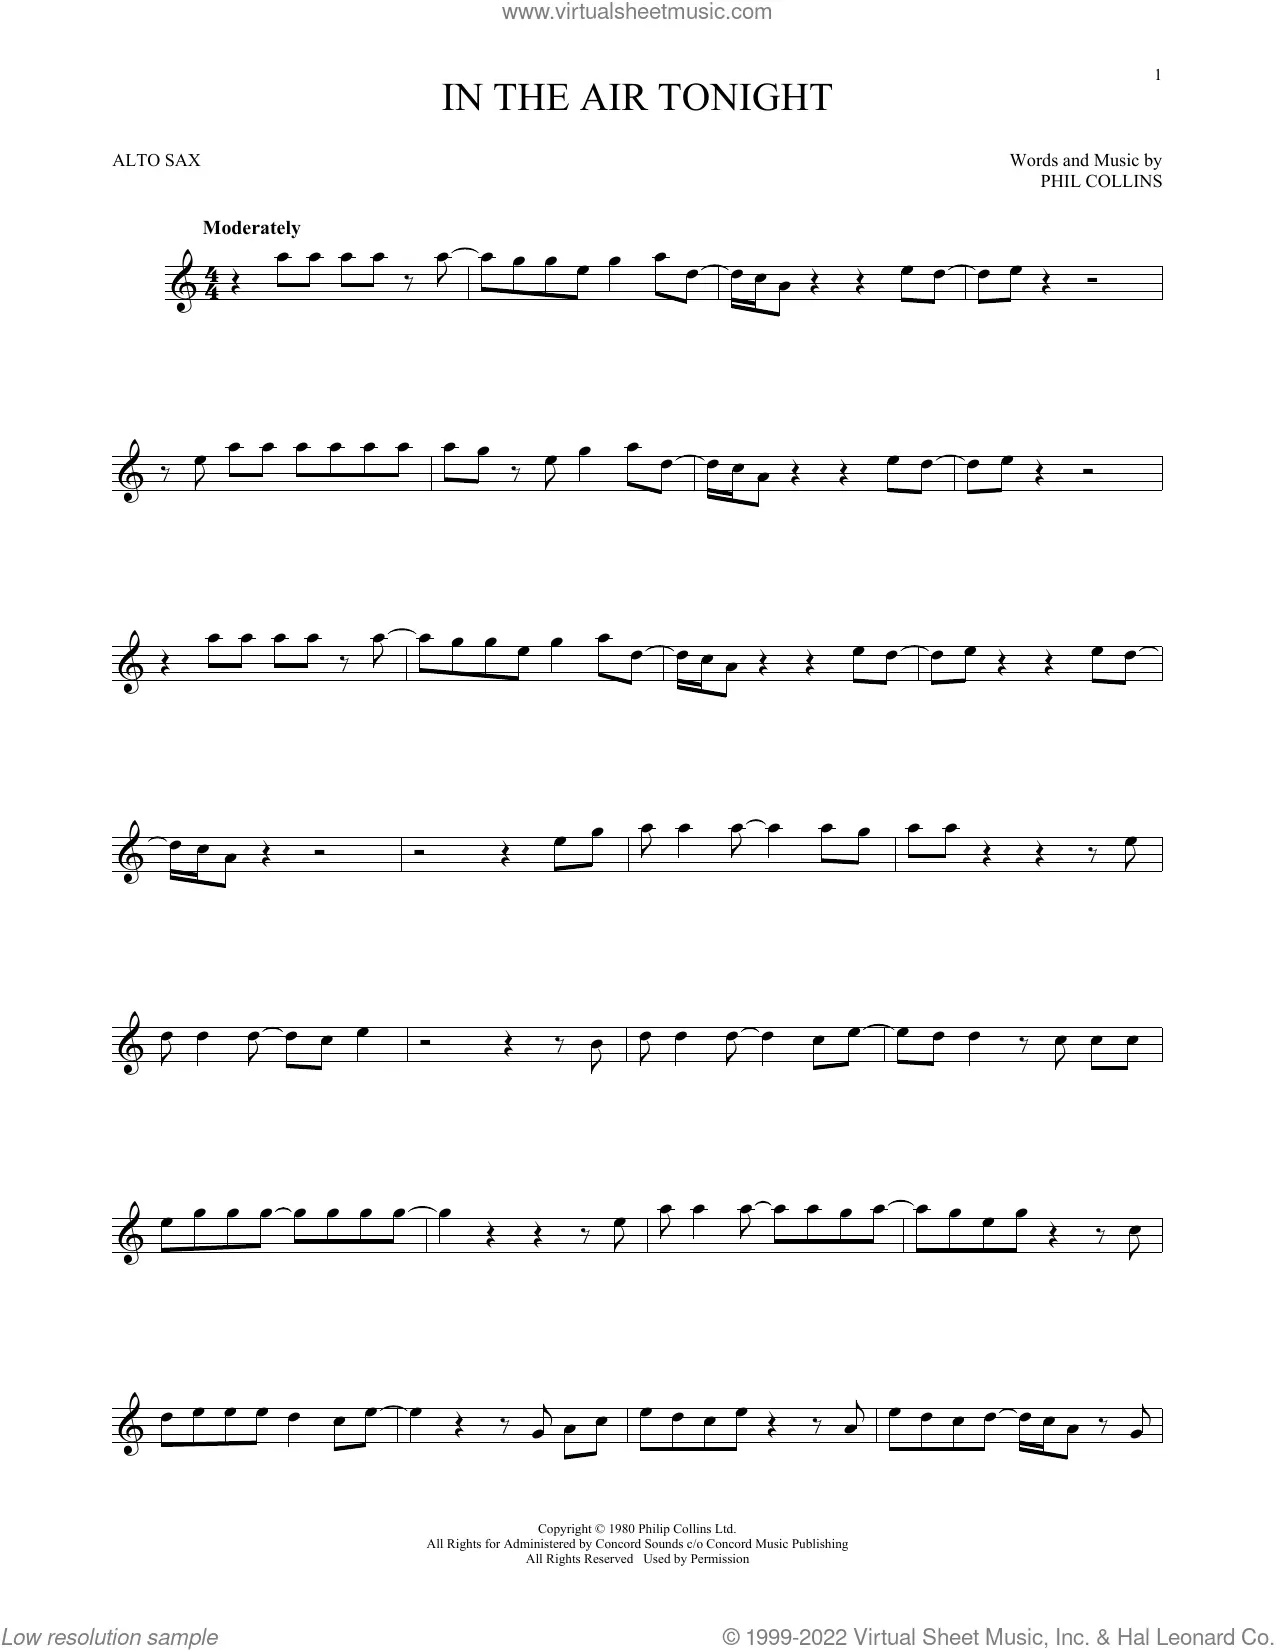 Download Digital Sheet Music of phil collins for Alto Saxophone